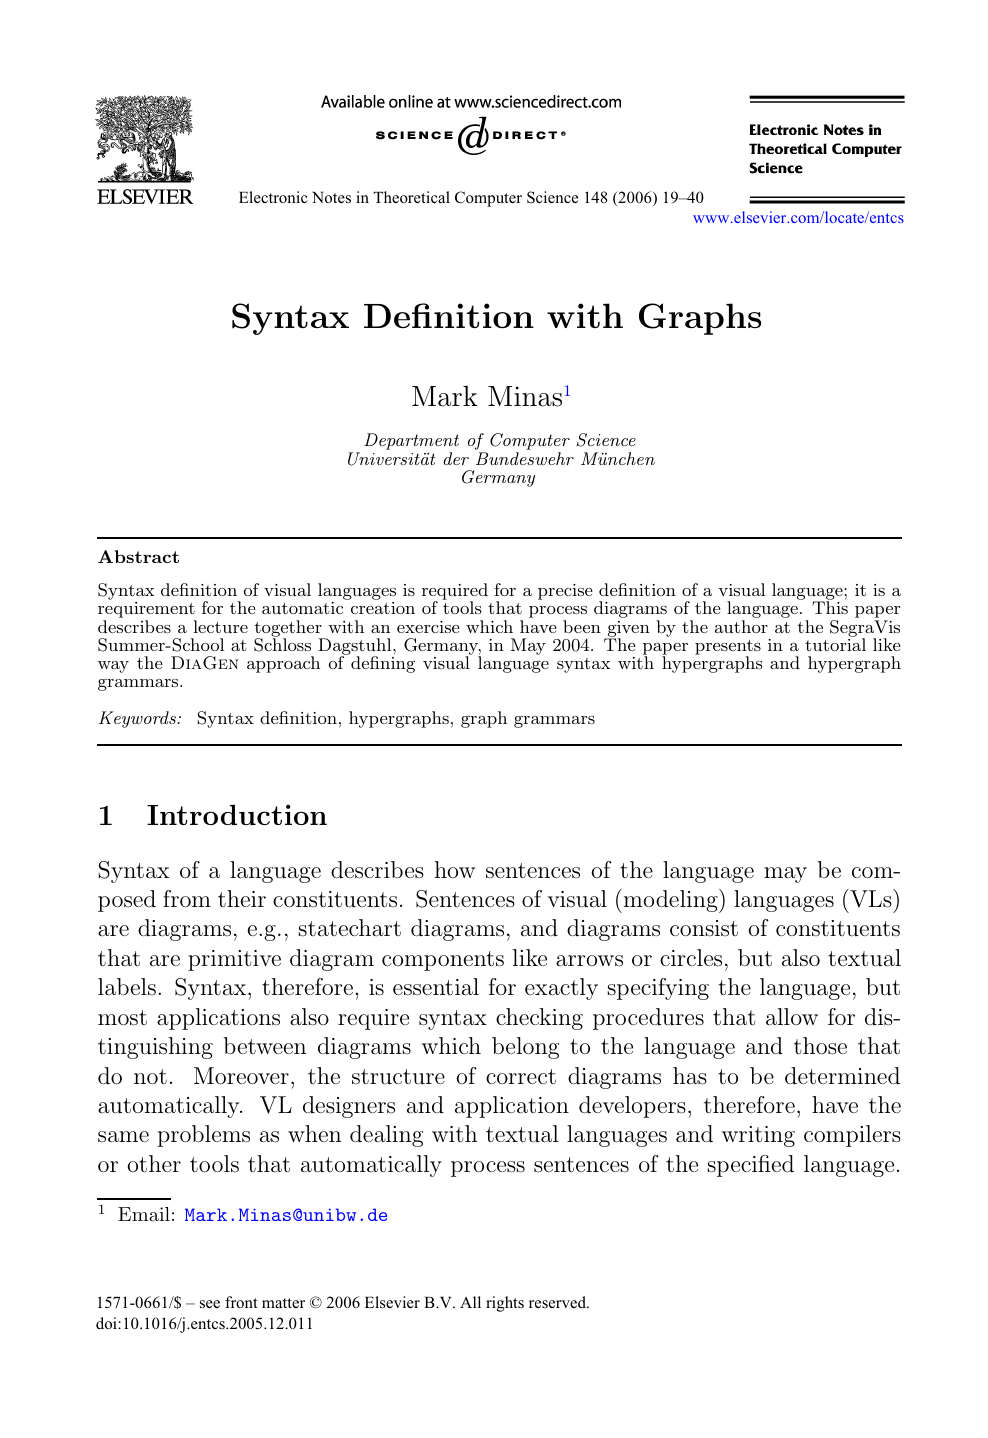 Syntax Definition With Graphs Topic Of Research Paper In Computer And Information Sciences Download Scholarly Article Pdf And Read For Free On Cyberleninka Open Science Hub - keywords definition computer